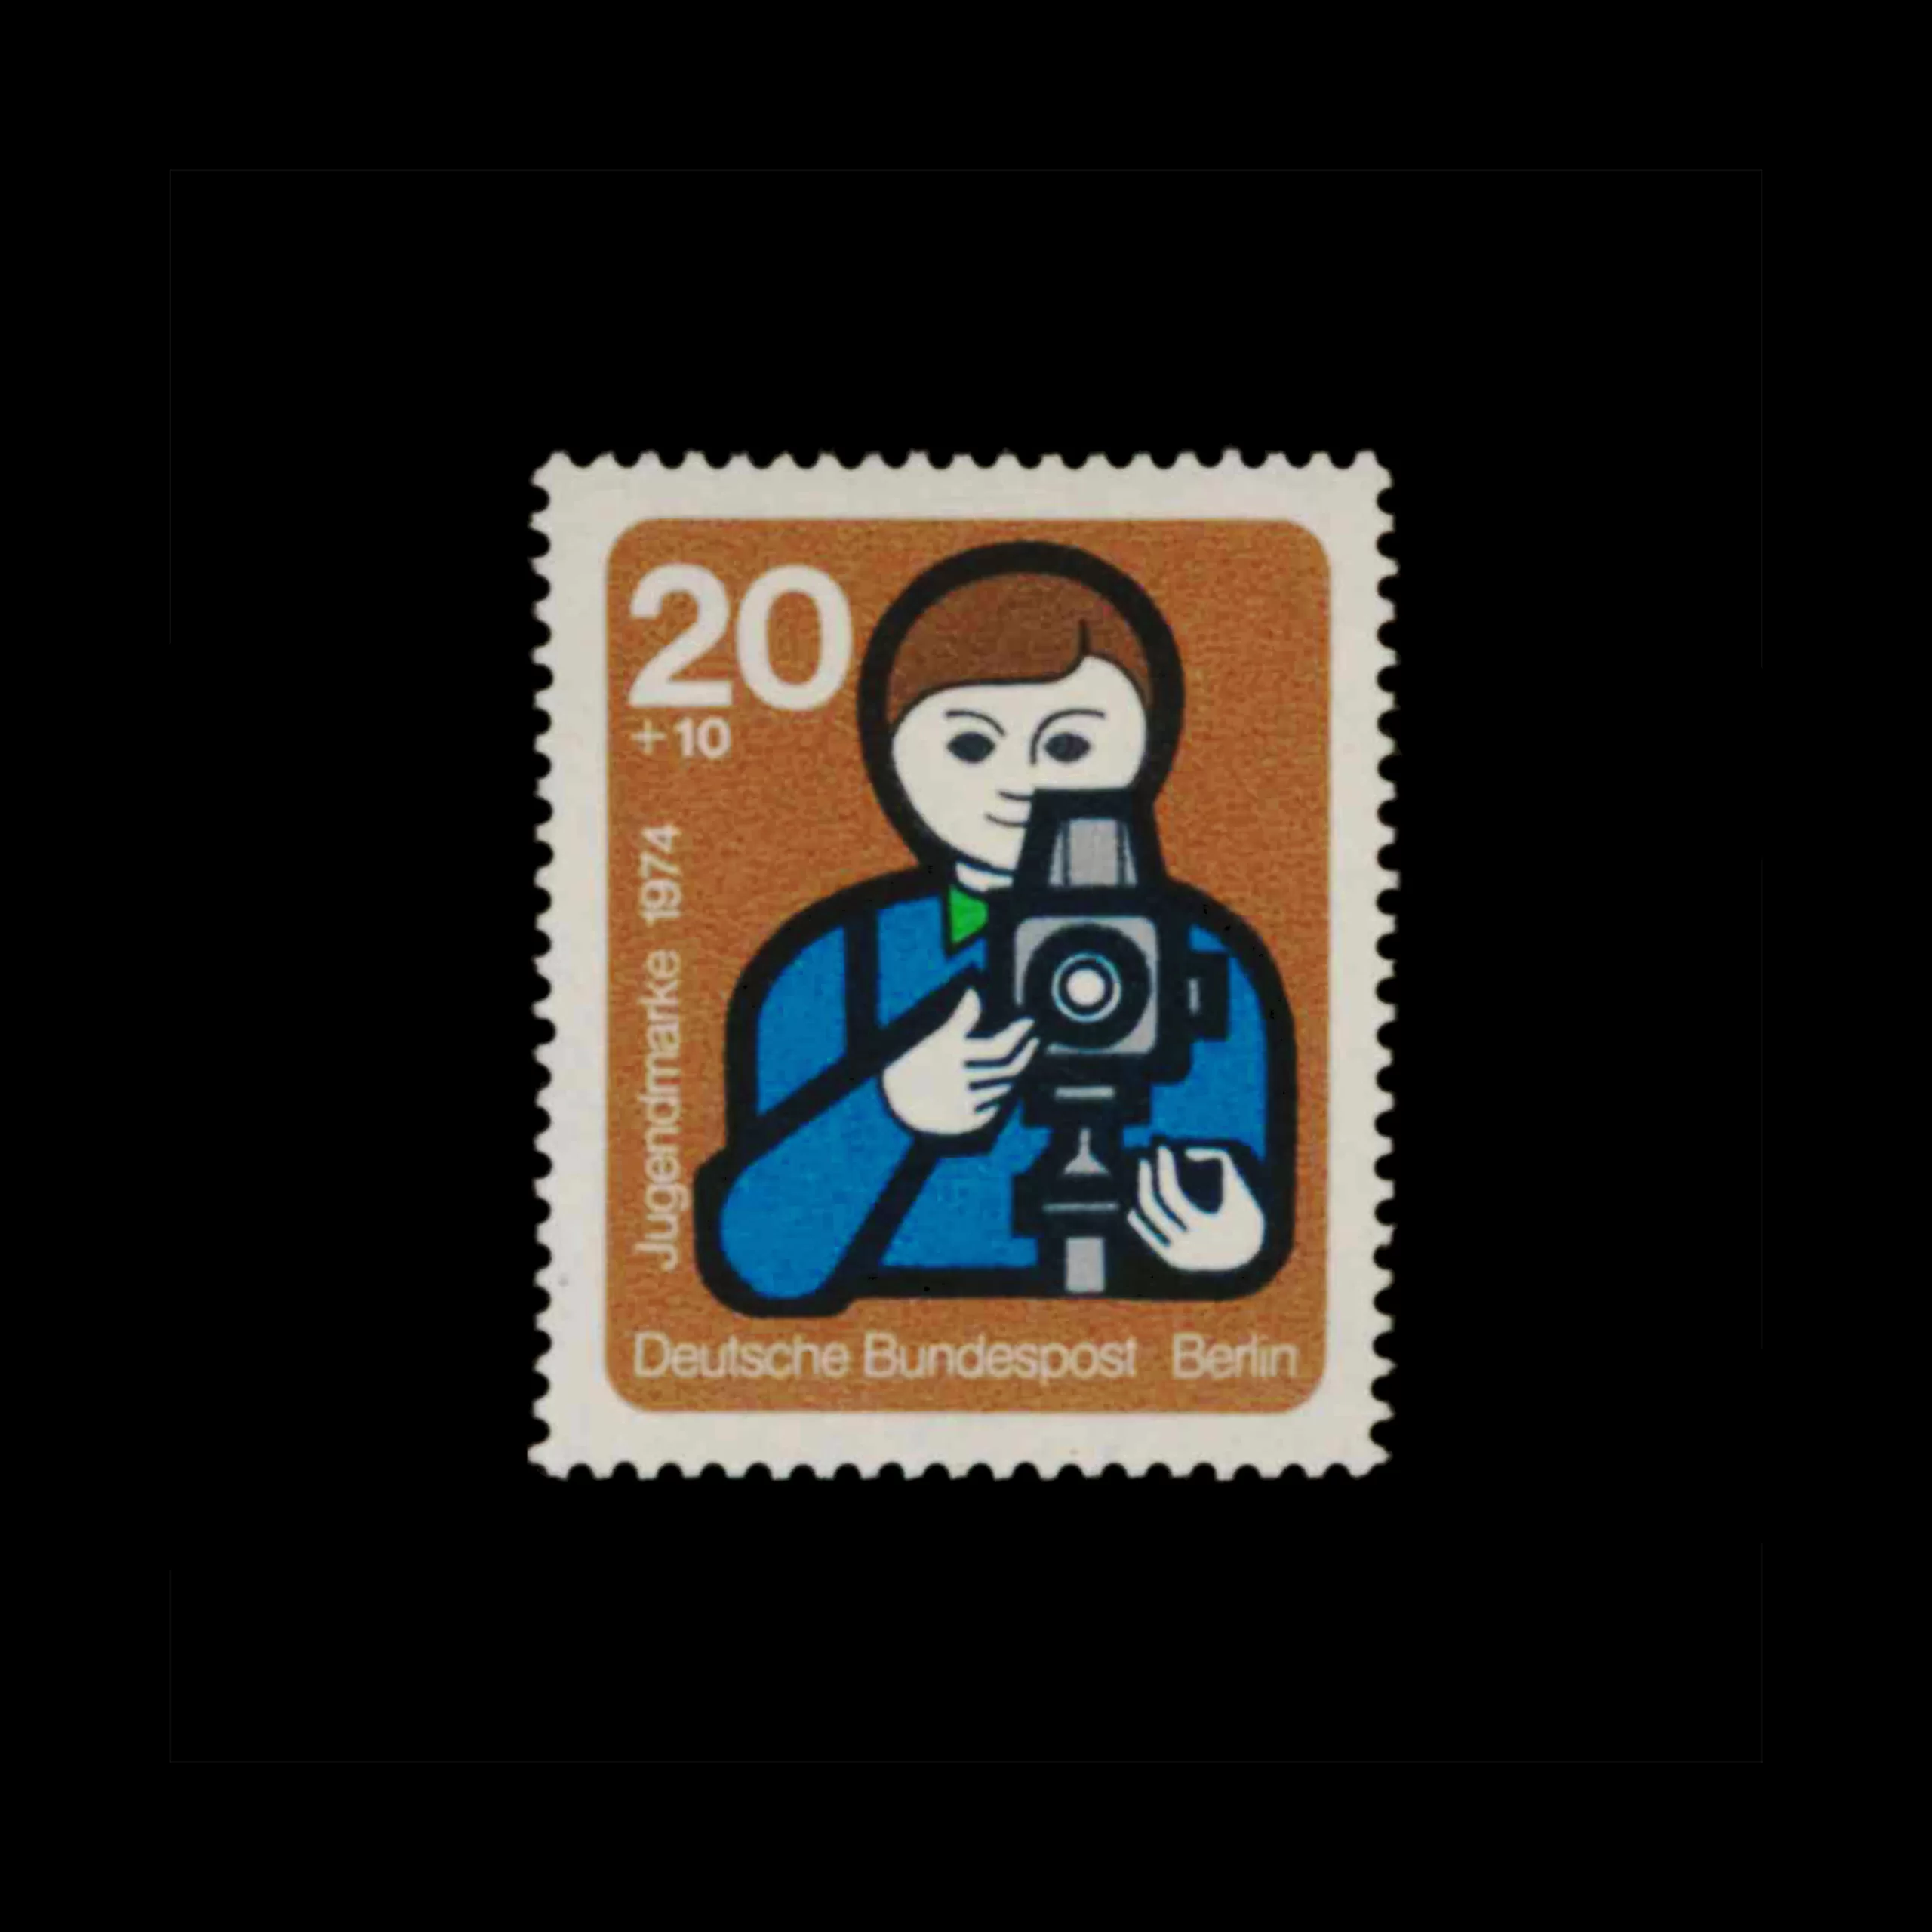 Youth Work, Germany Stamps, 1974. Designed by Peter Lorenz